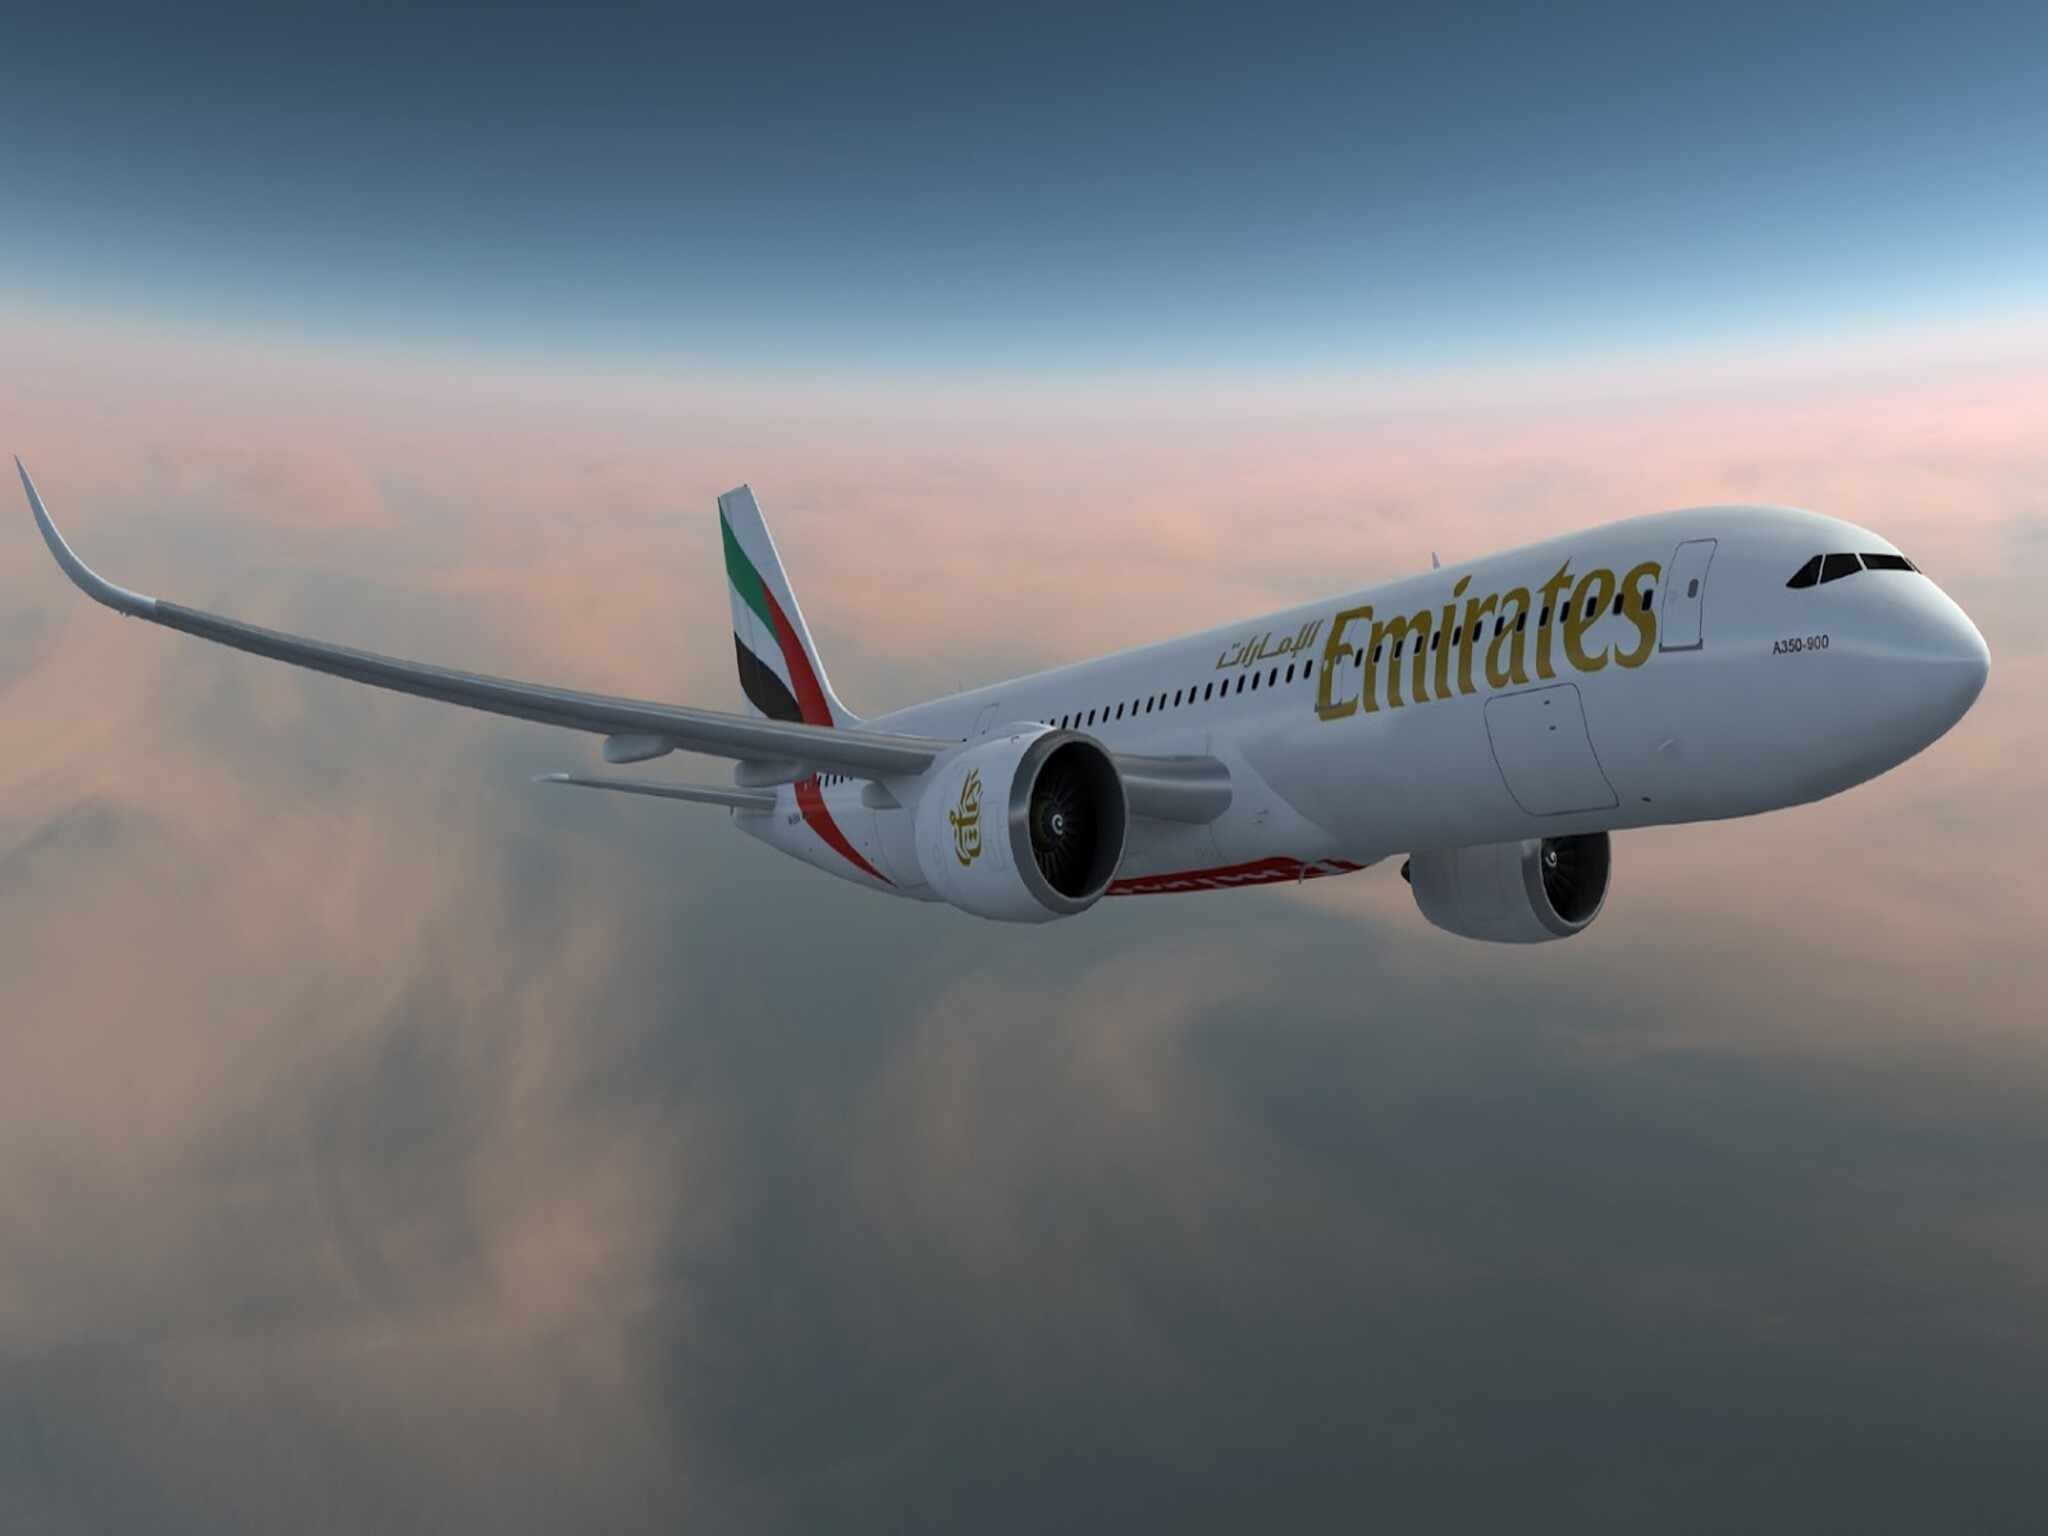 Emirates flight cancellation: An accident in the sky damaged the Emirates plane